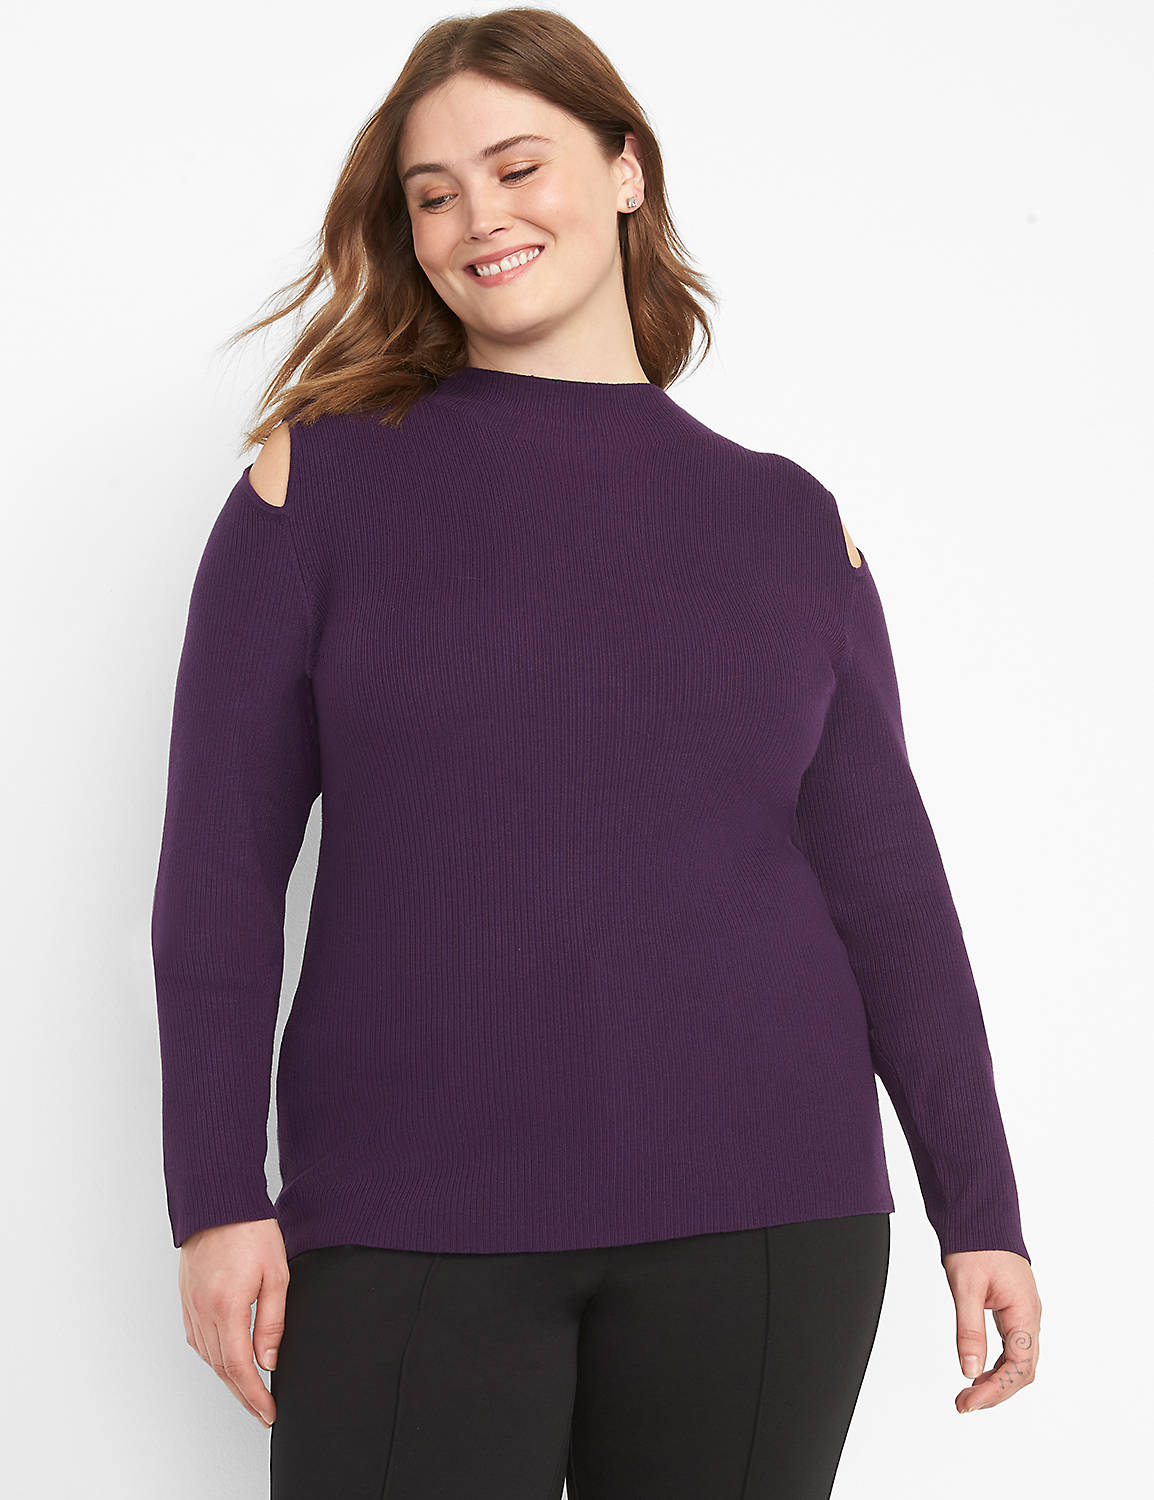 Long Sleeve Mock Neck Cut Out Rib Pullover 1124485:PANTONE Purple Pennant:10/12 Product Image 1